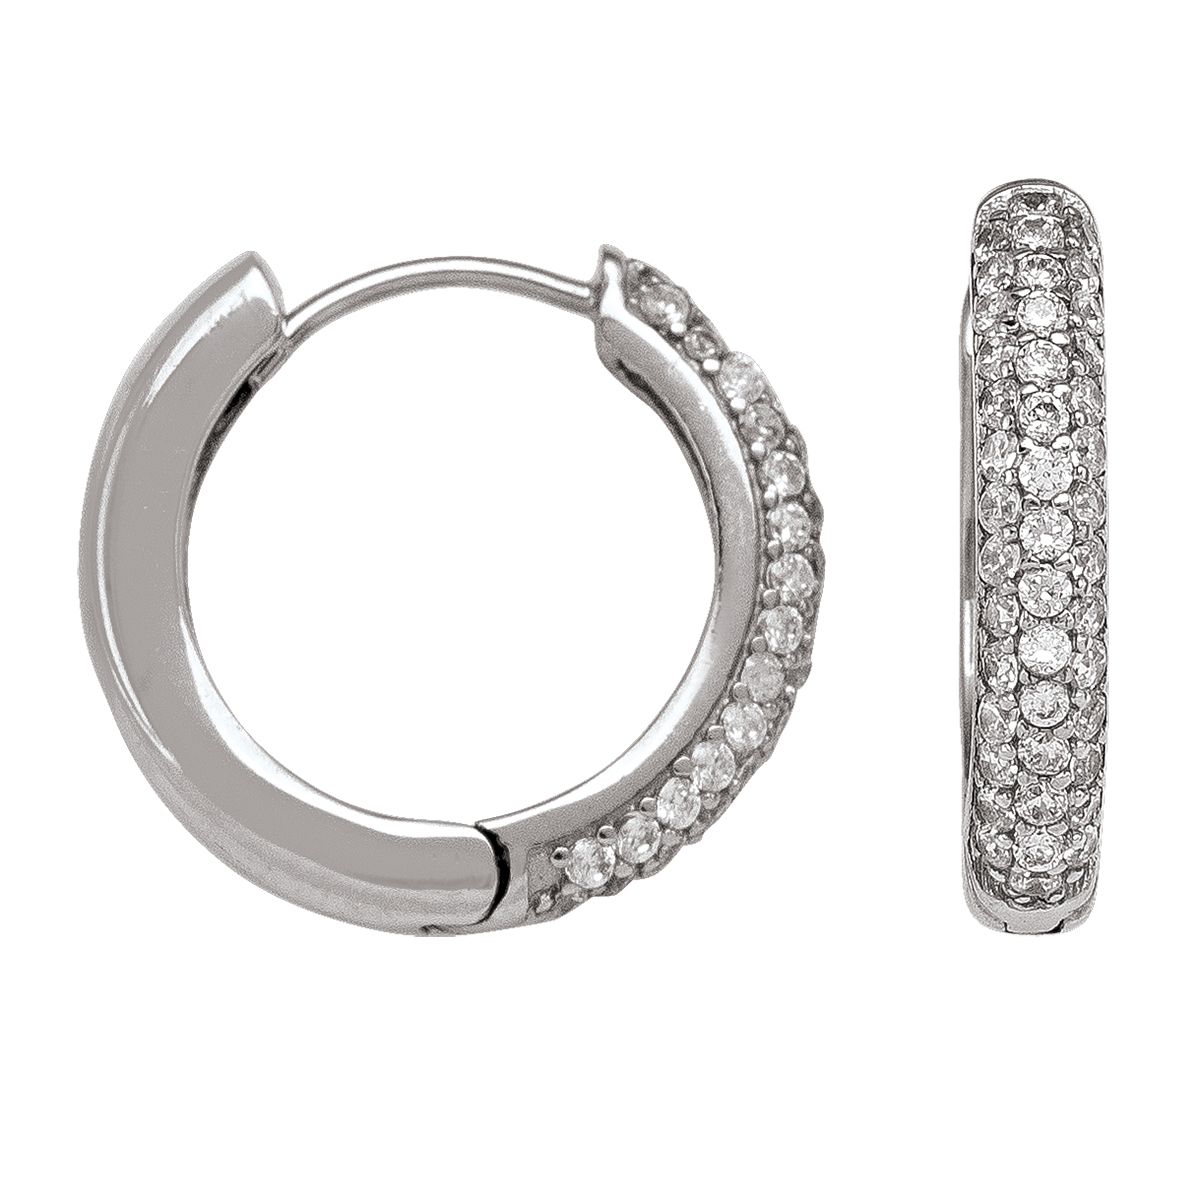 10K White Gold Huggie Hoop Earrings with Dimond Shaped Cubic Zirconia Stones